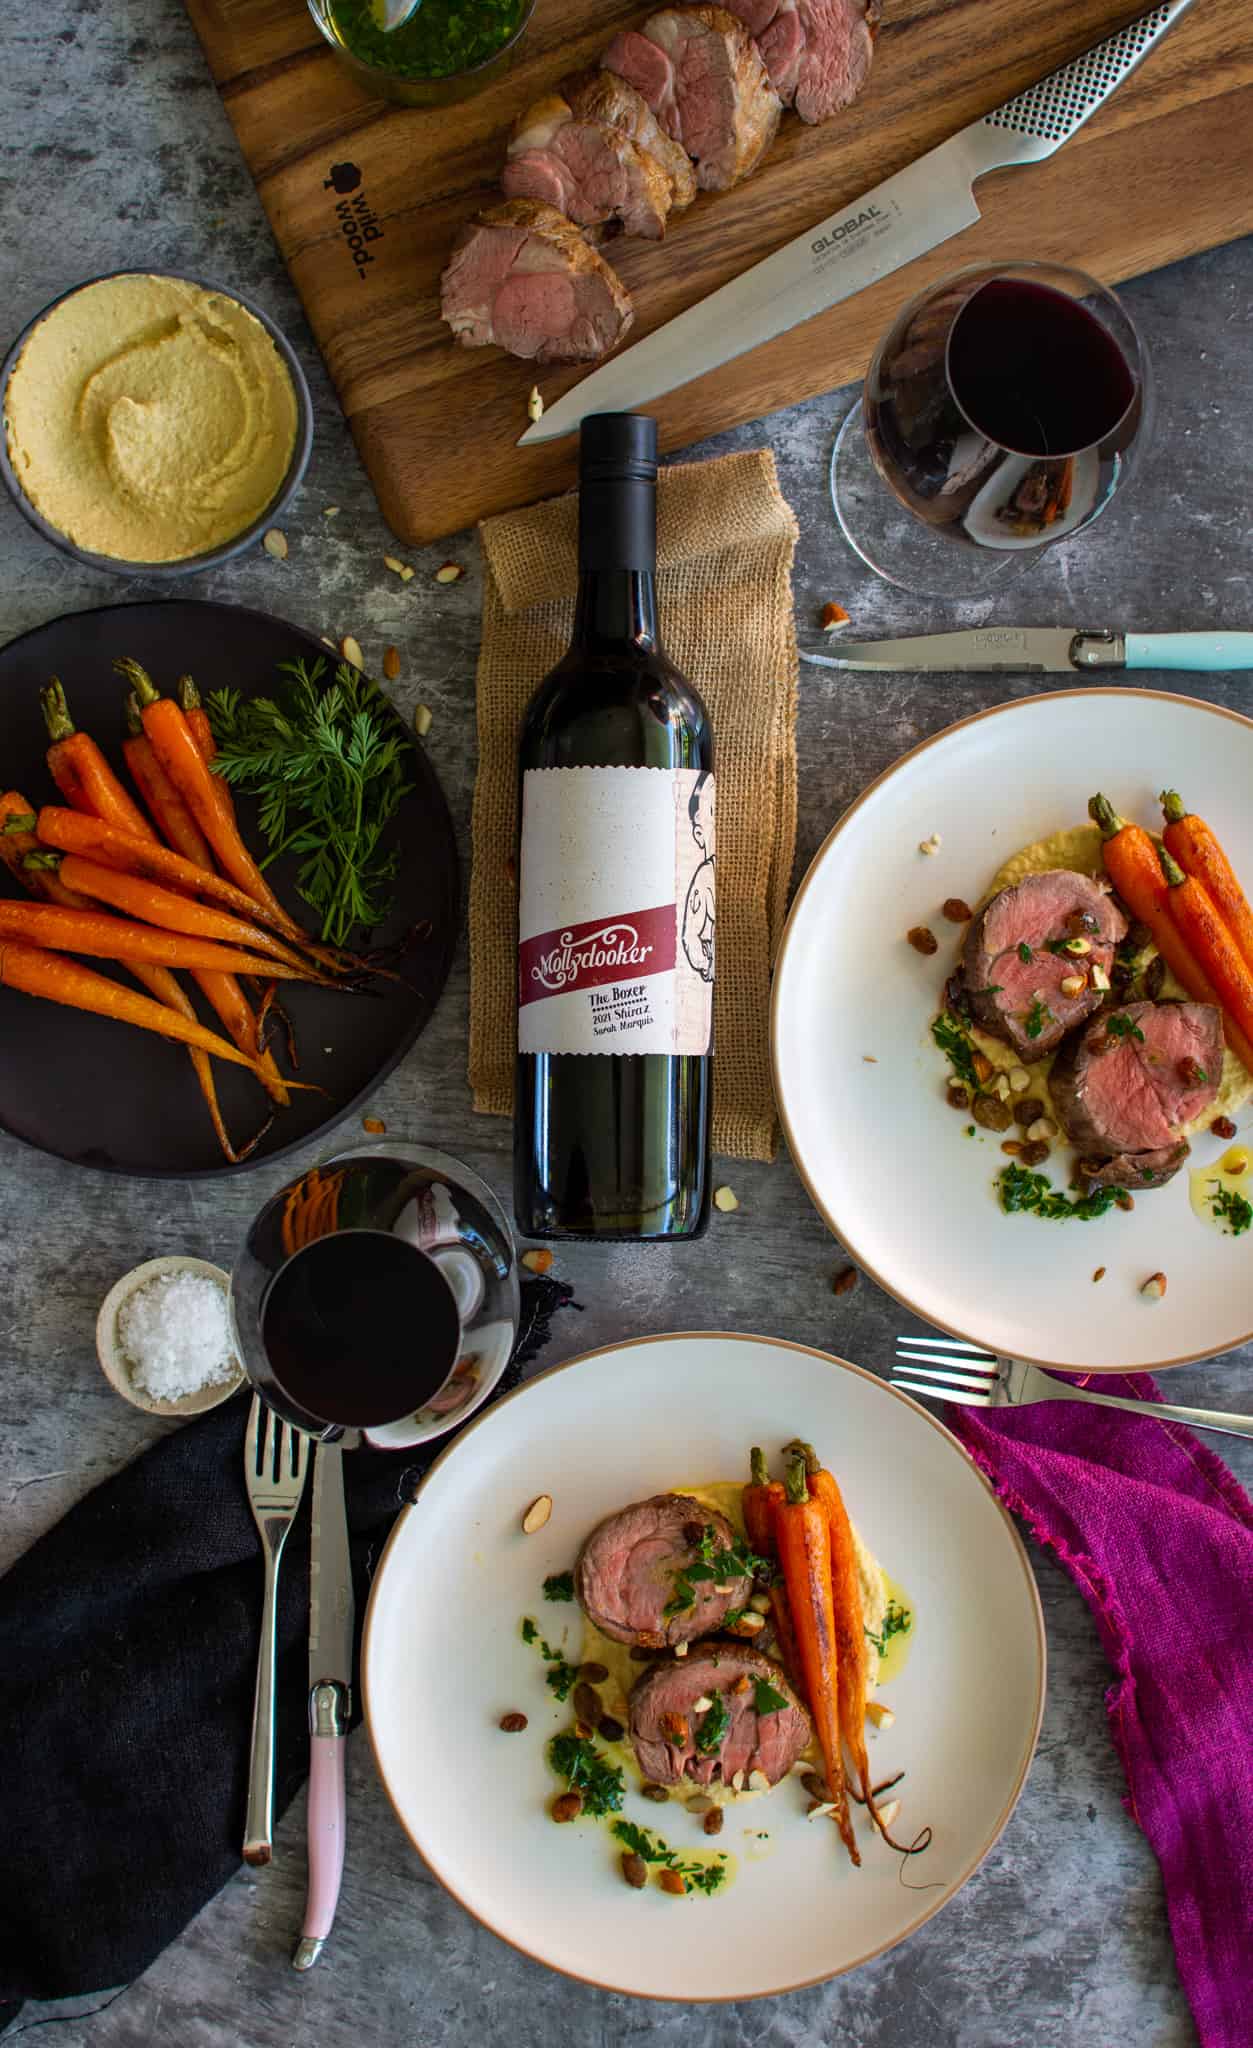 roasted bonless lamb shoulder with hummus and carrots on a plate. Mollydoooker wine, cutlery and plate of carrots also on the table 